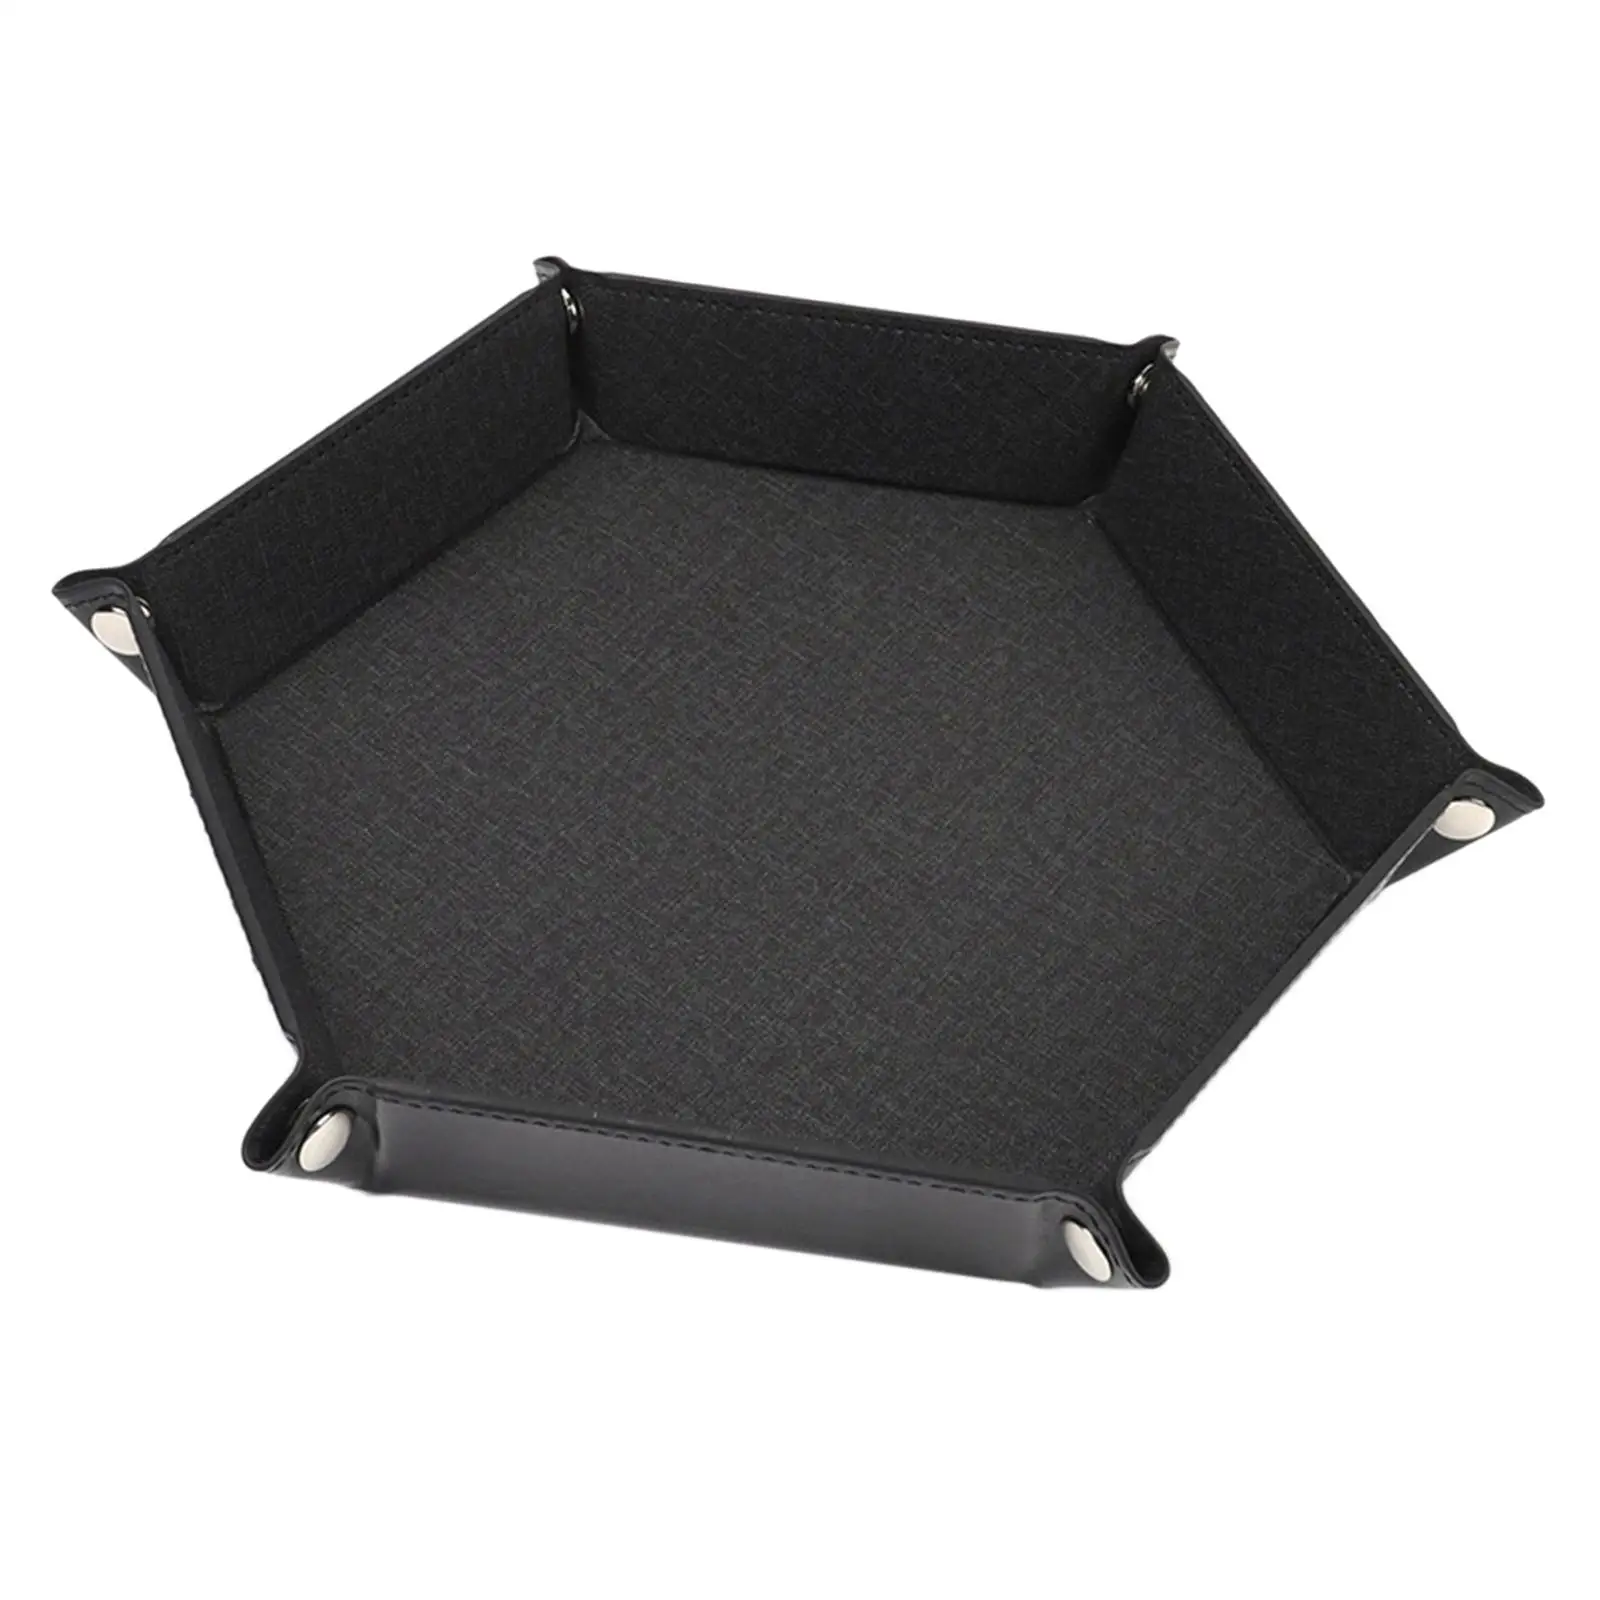 Hexagonal Dice Tray Wearable Multifunctional Double Sided Box Folding Dice Rolling Tray for Snacks Stuff Keys Candies